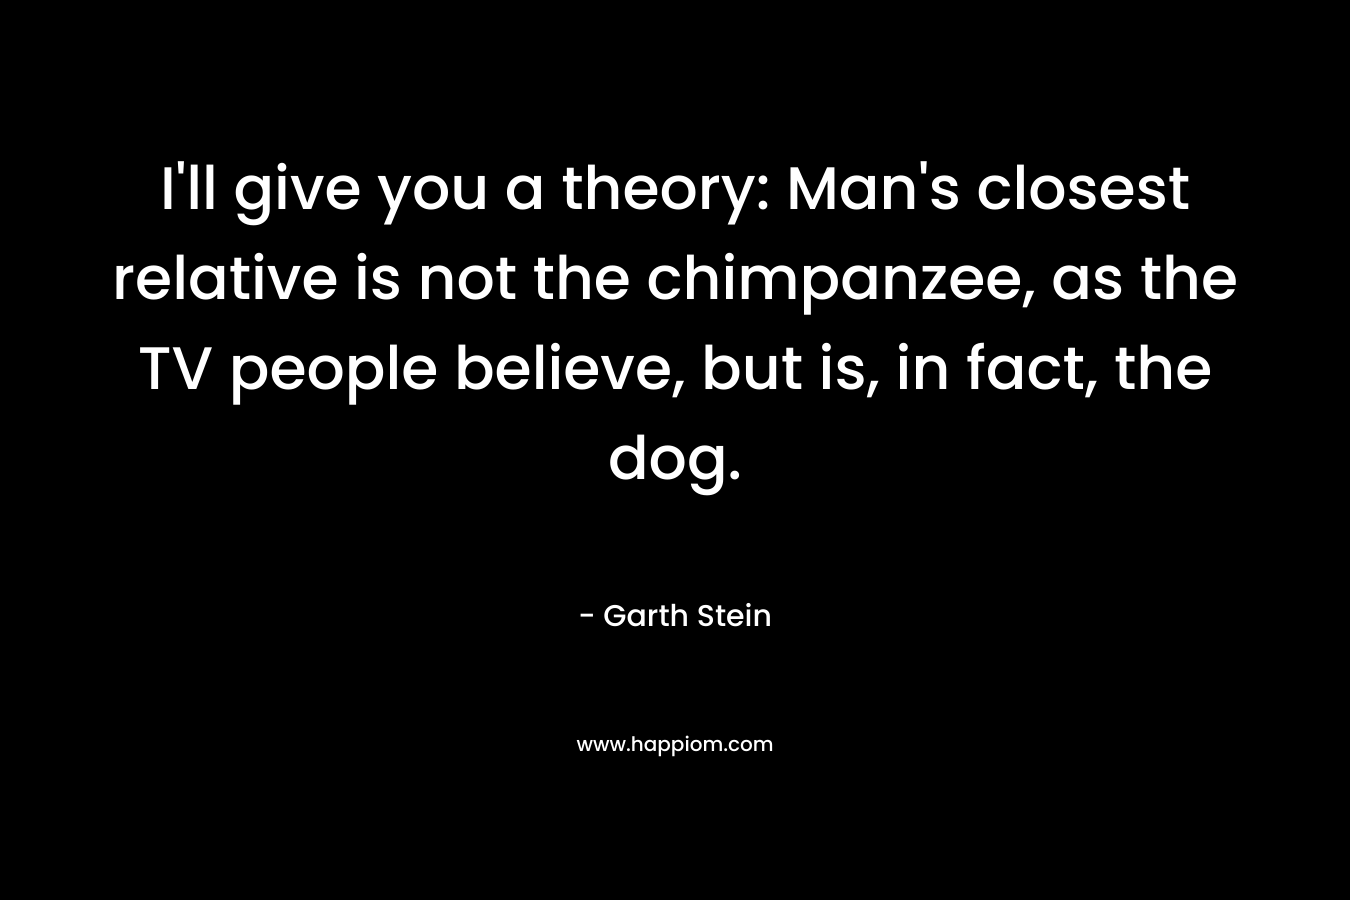 I'll give you a theory: Man's closest relative is not the chimpanzee, as the TV people believe, but is, in fact, the dog.